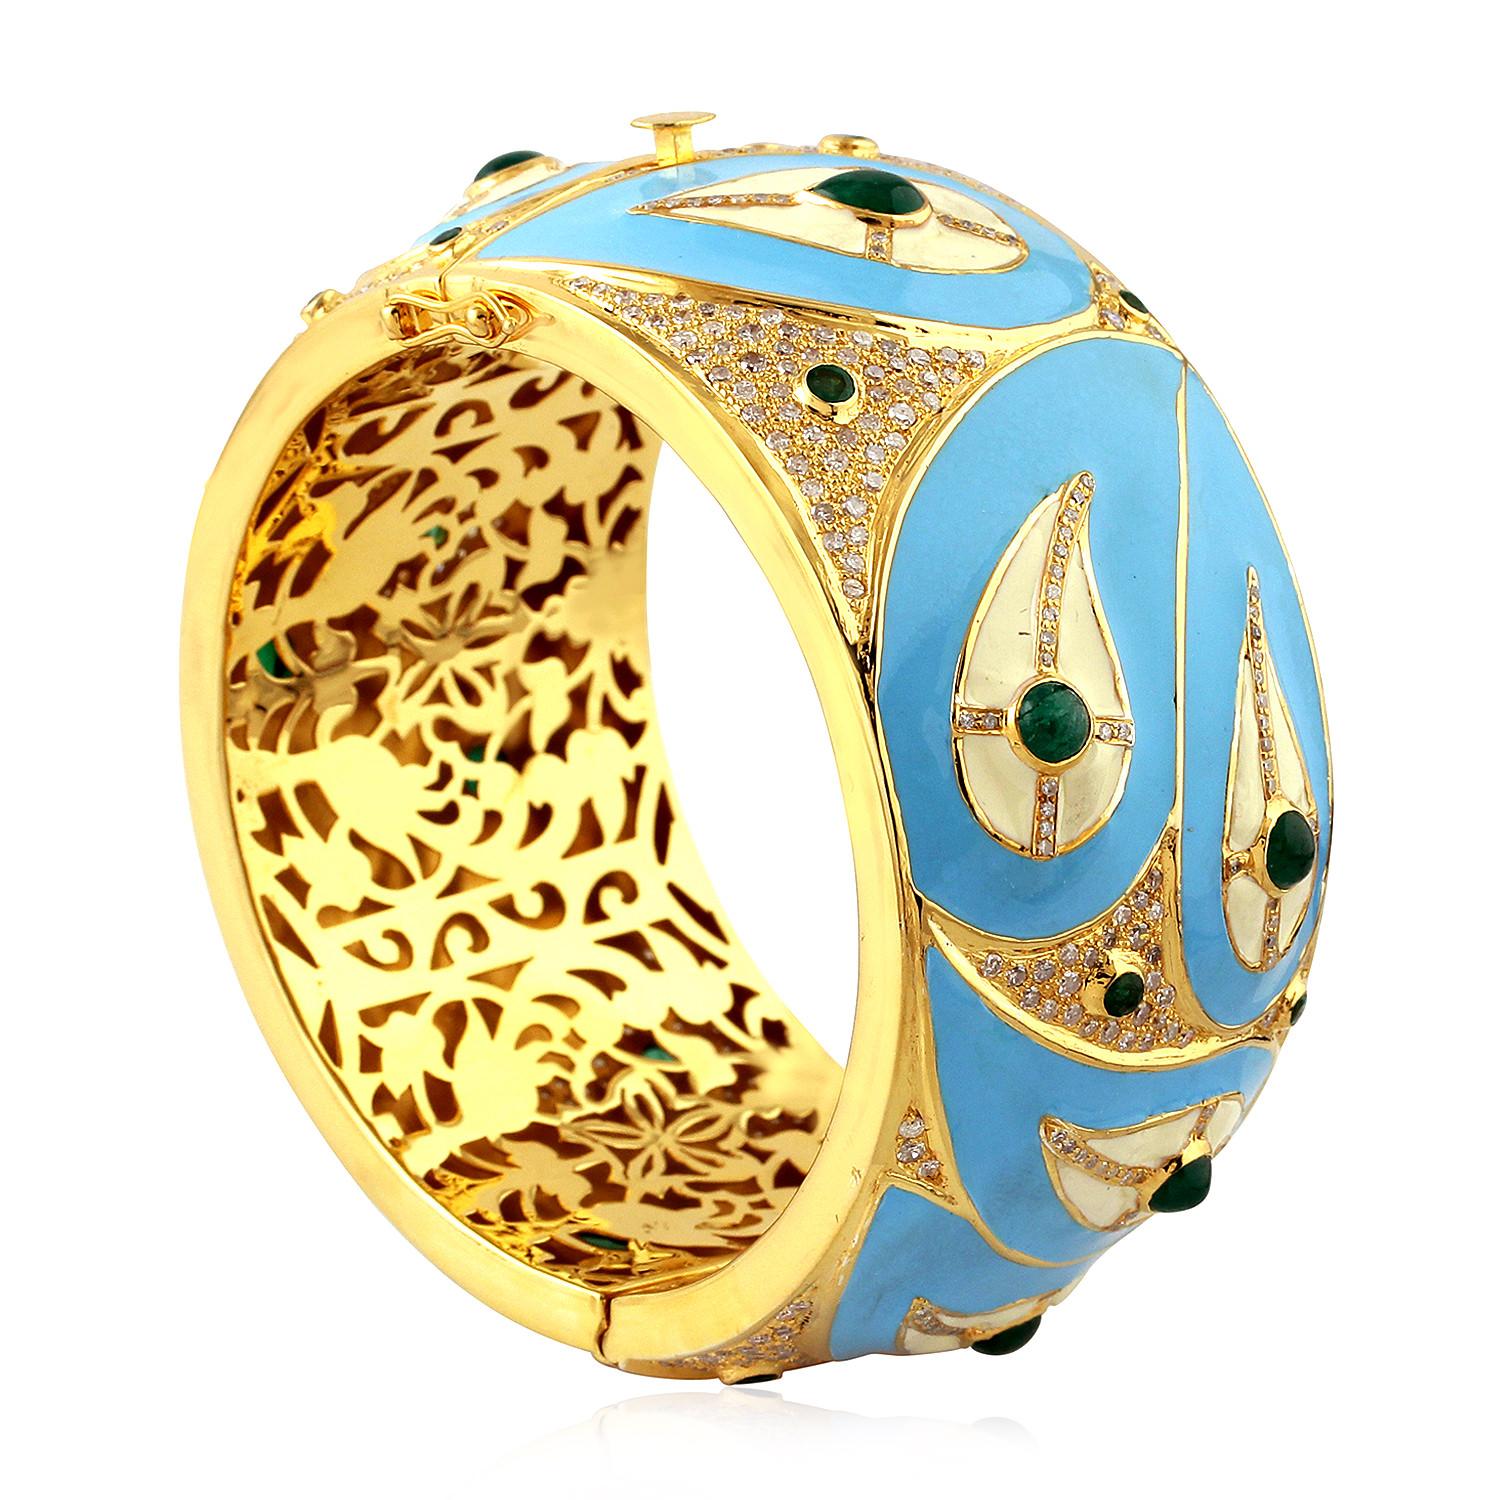 Stylish and forever this paisley design turquoise enamel openable bangle with diamonds and emeralds is a classic piece. This bangle is made in 18k yellow gold and silver, and can be opened on side and has safety clasps on both the sides.

18k: